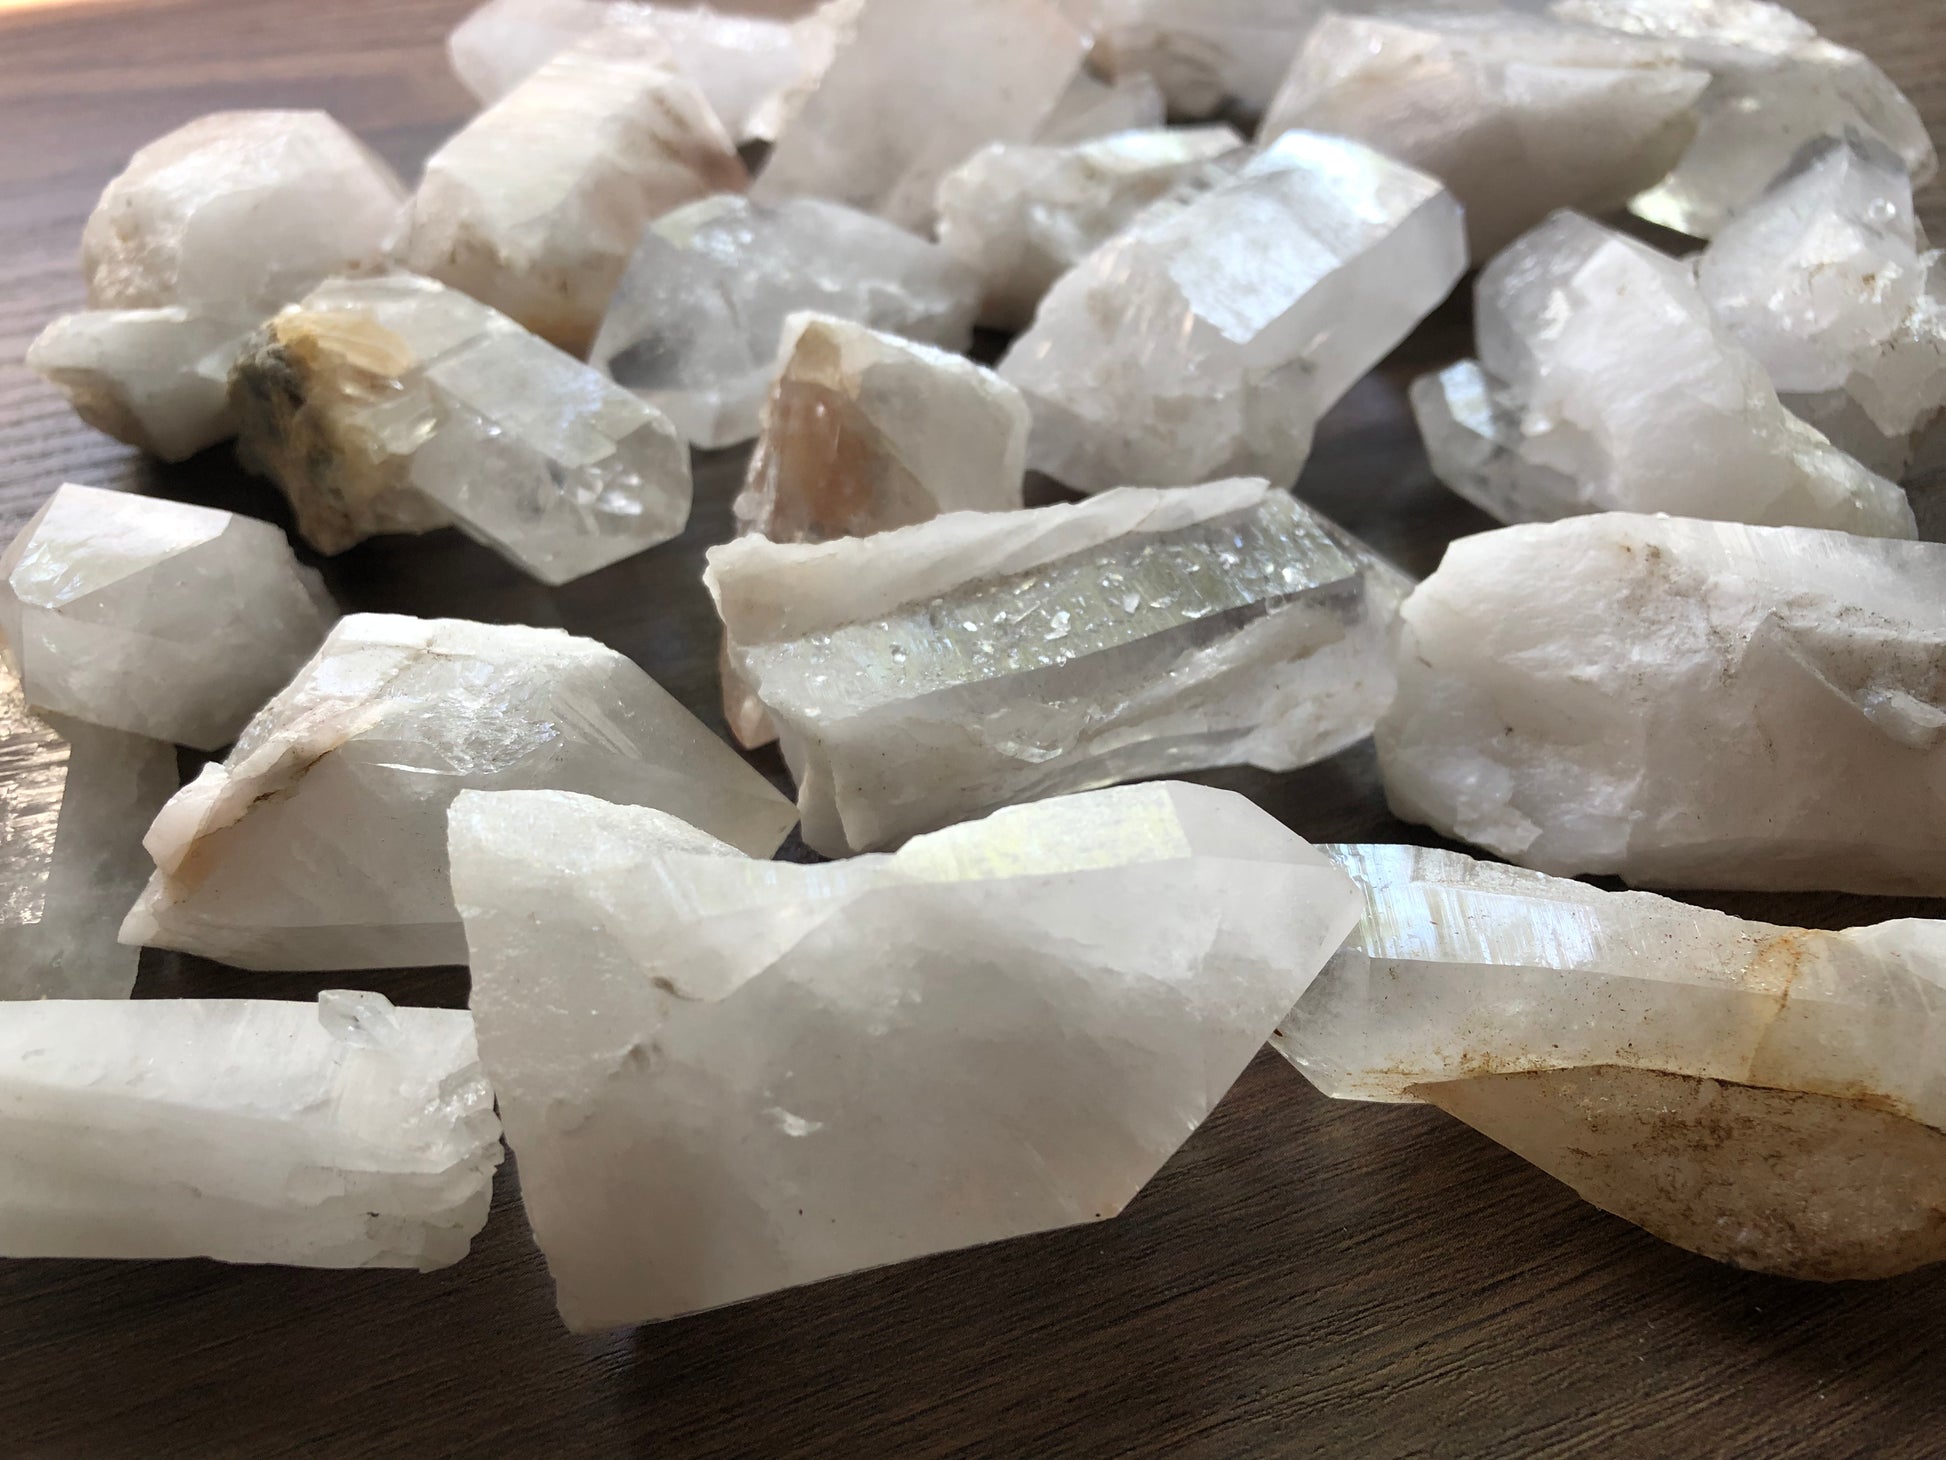 A close up view of an assortment of medium sized rough cut quartz crystals on a wooden surface. They are various shapes. They are all relatively clear, with some having slight discoloration.